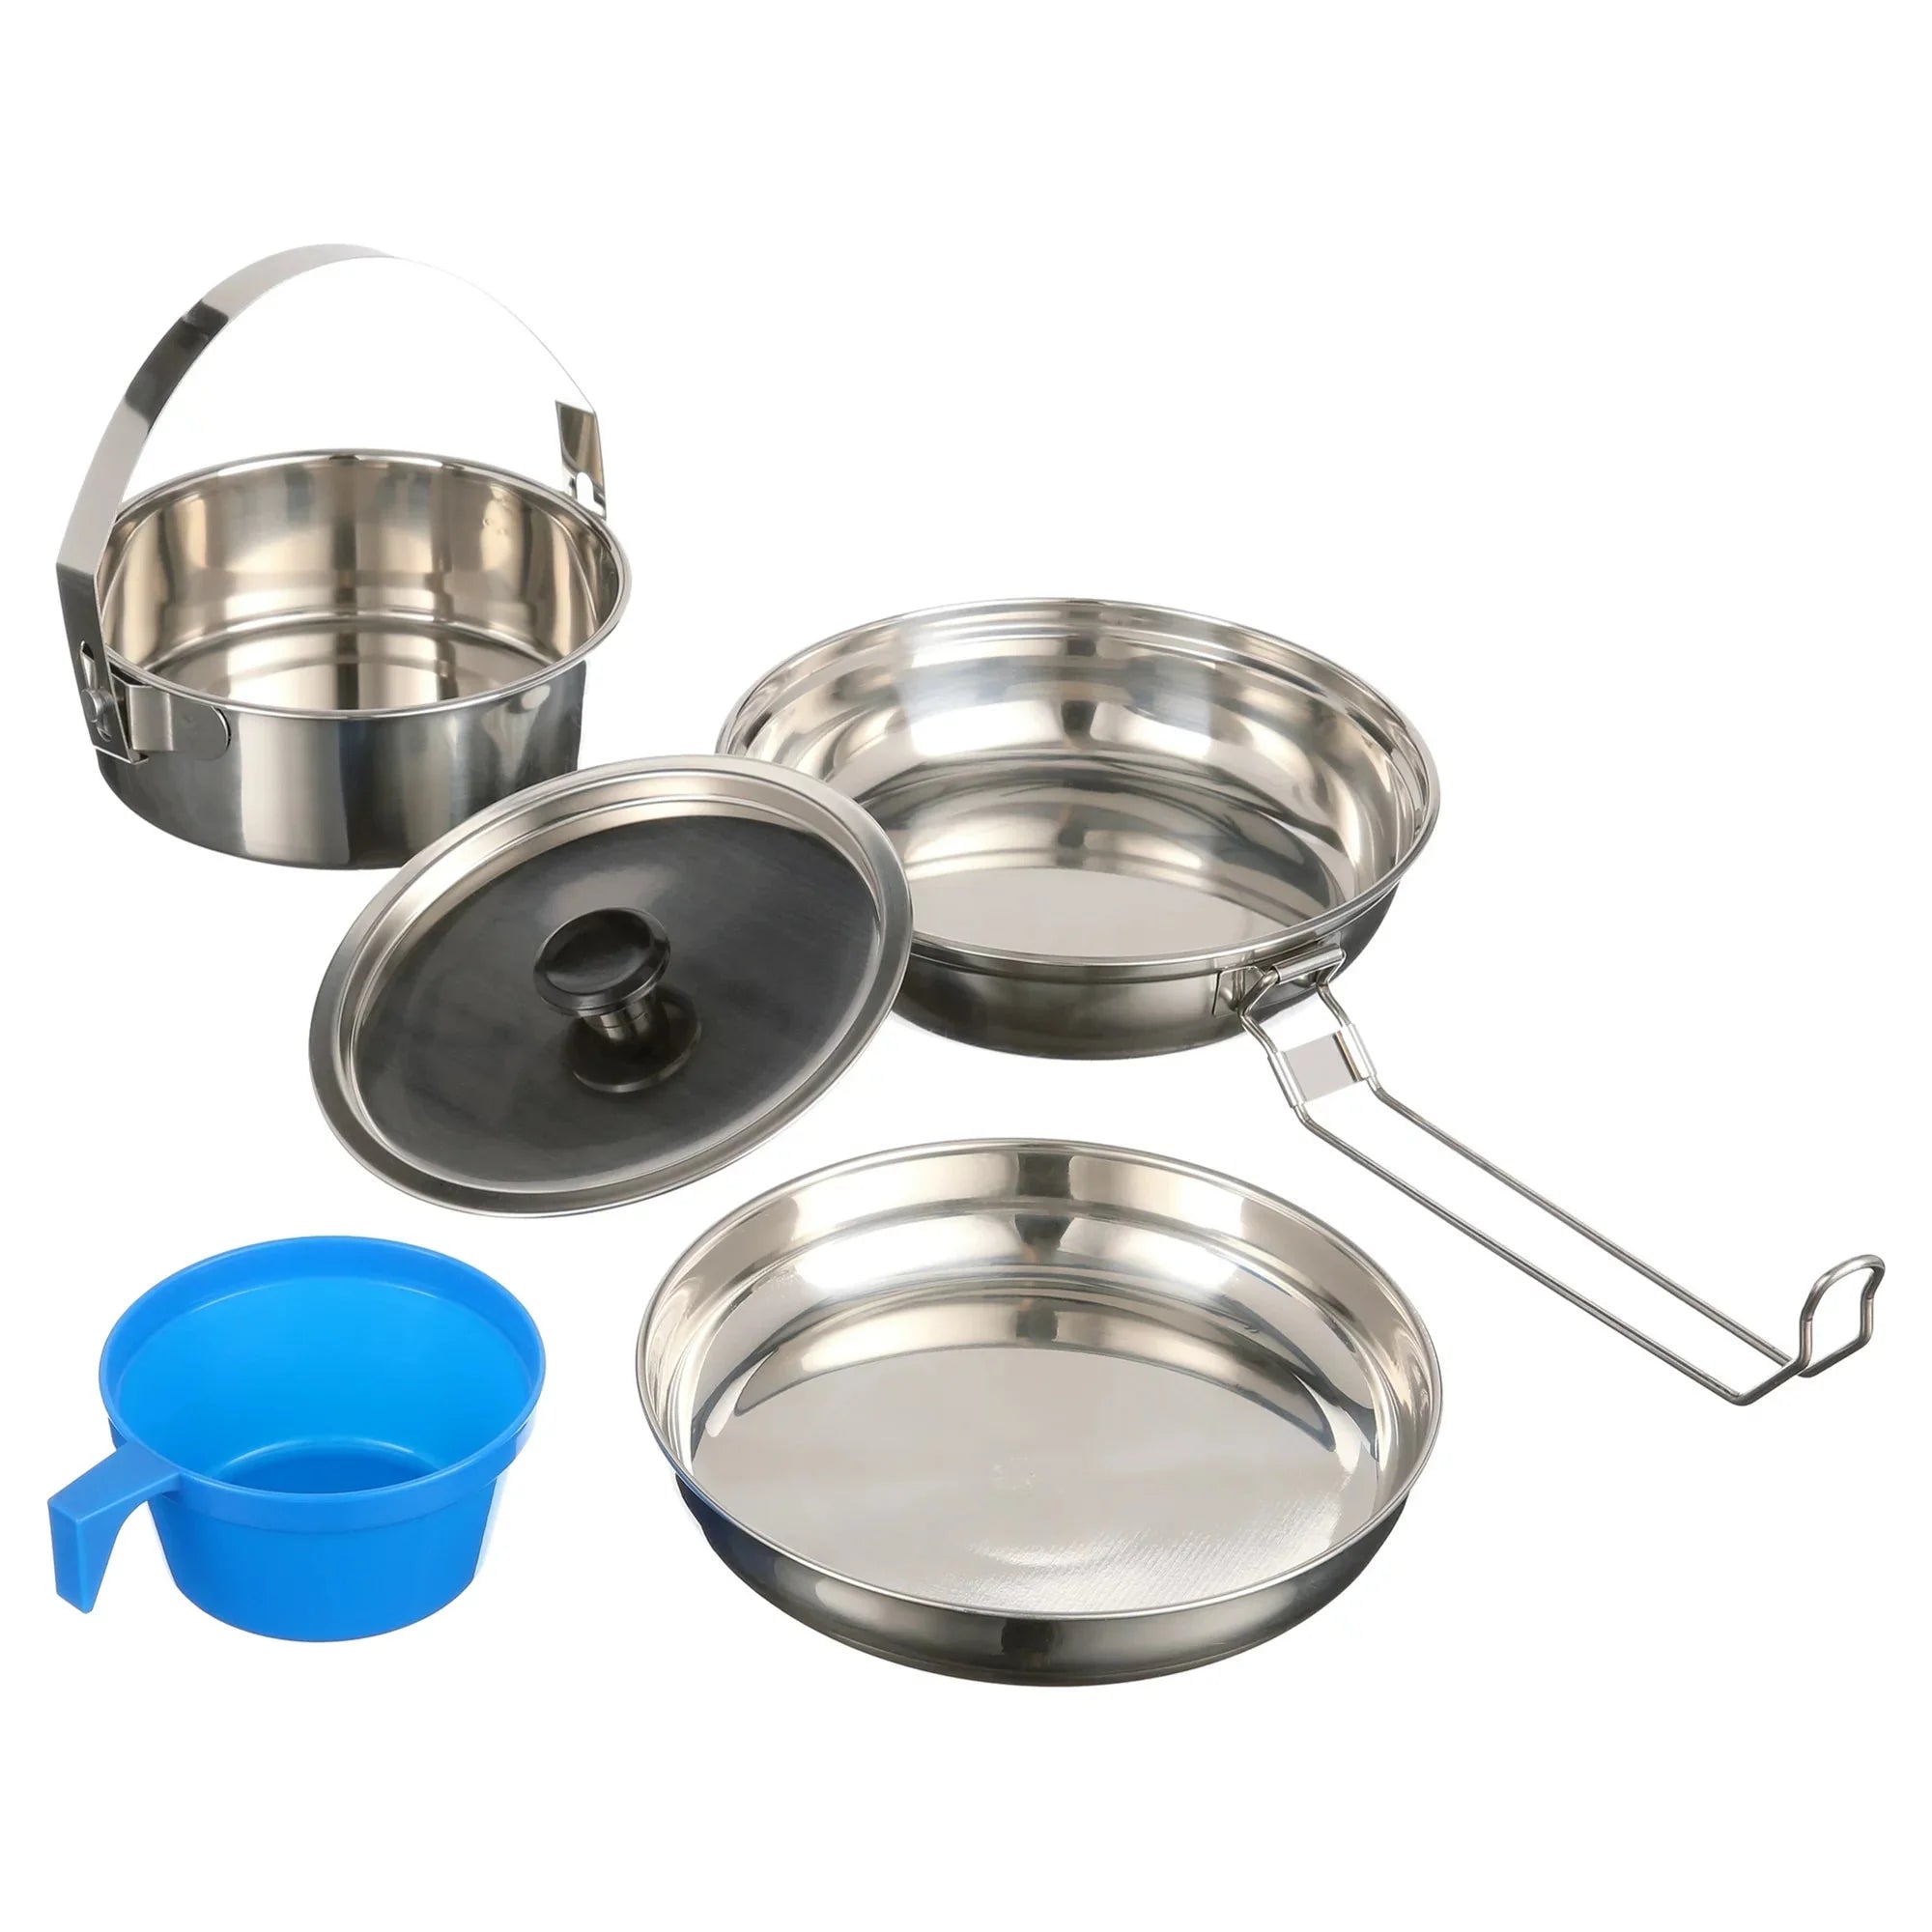 Wholesale prices with free shipping all over United States Ozark Trail Space-Saving 5-Piece Cookware Mess Kit, Stainless Steel and Plastic - Steven Deals